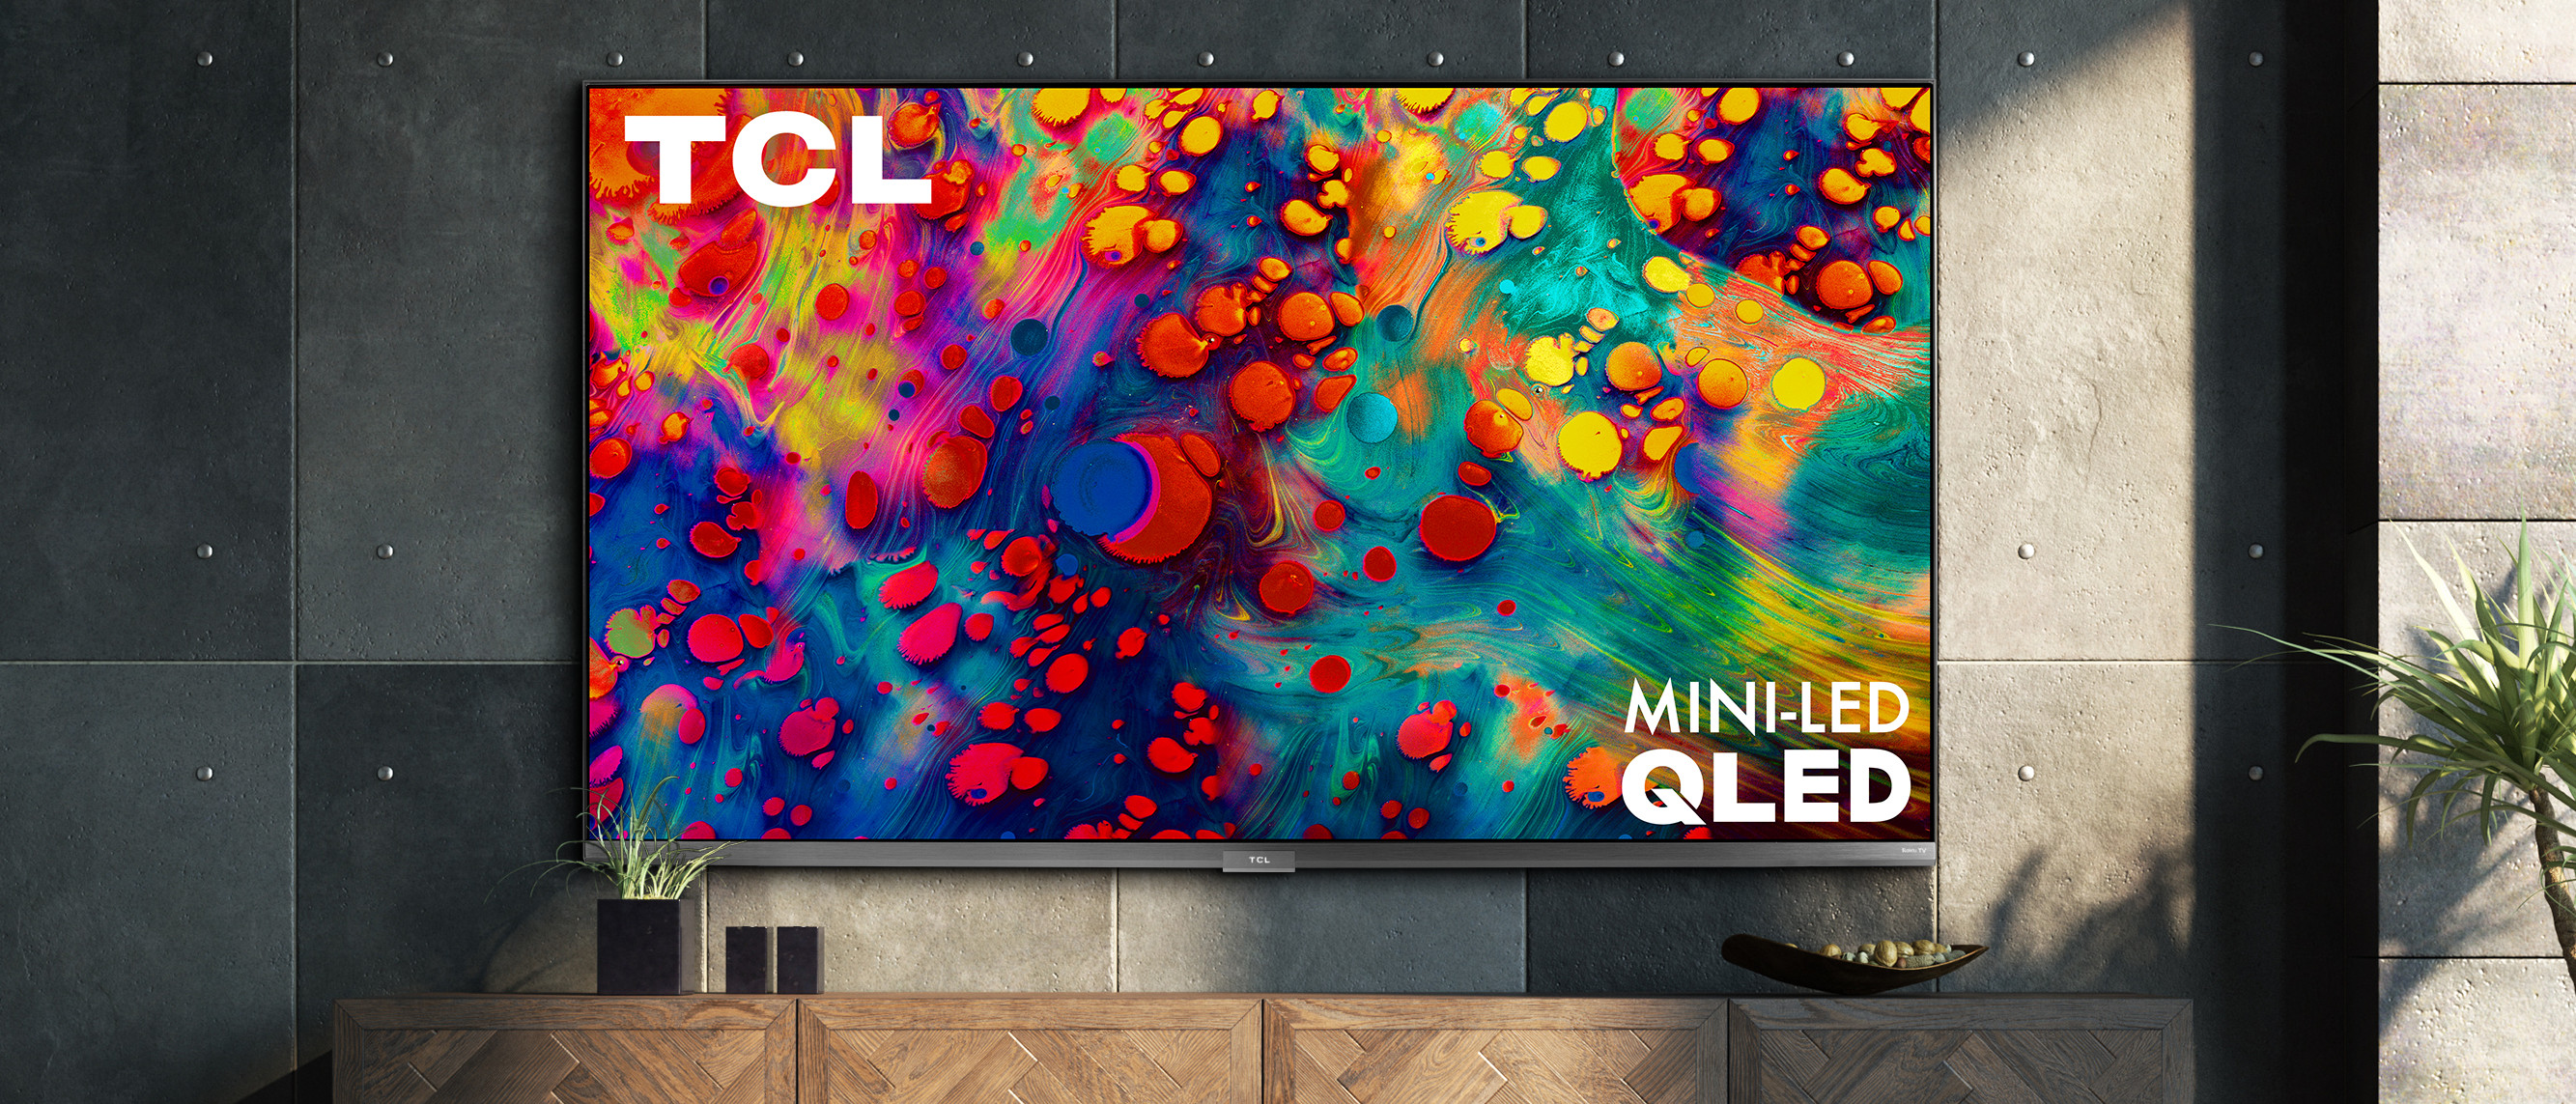 TCL 6-Series 2020 QLED TV with Mini LED (55R635, 65R635, 75R635) review |  TechRadar